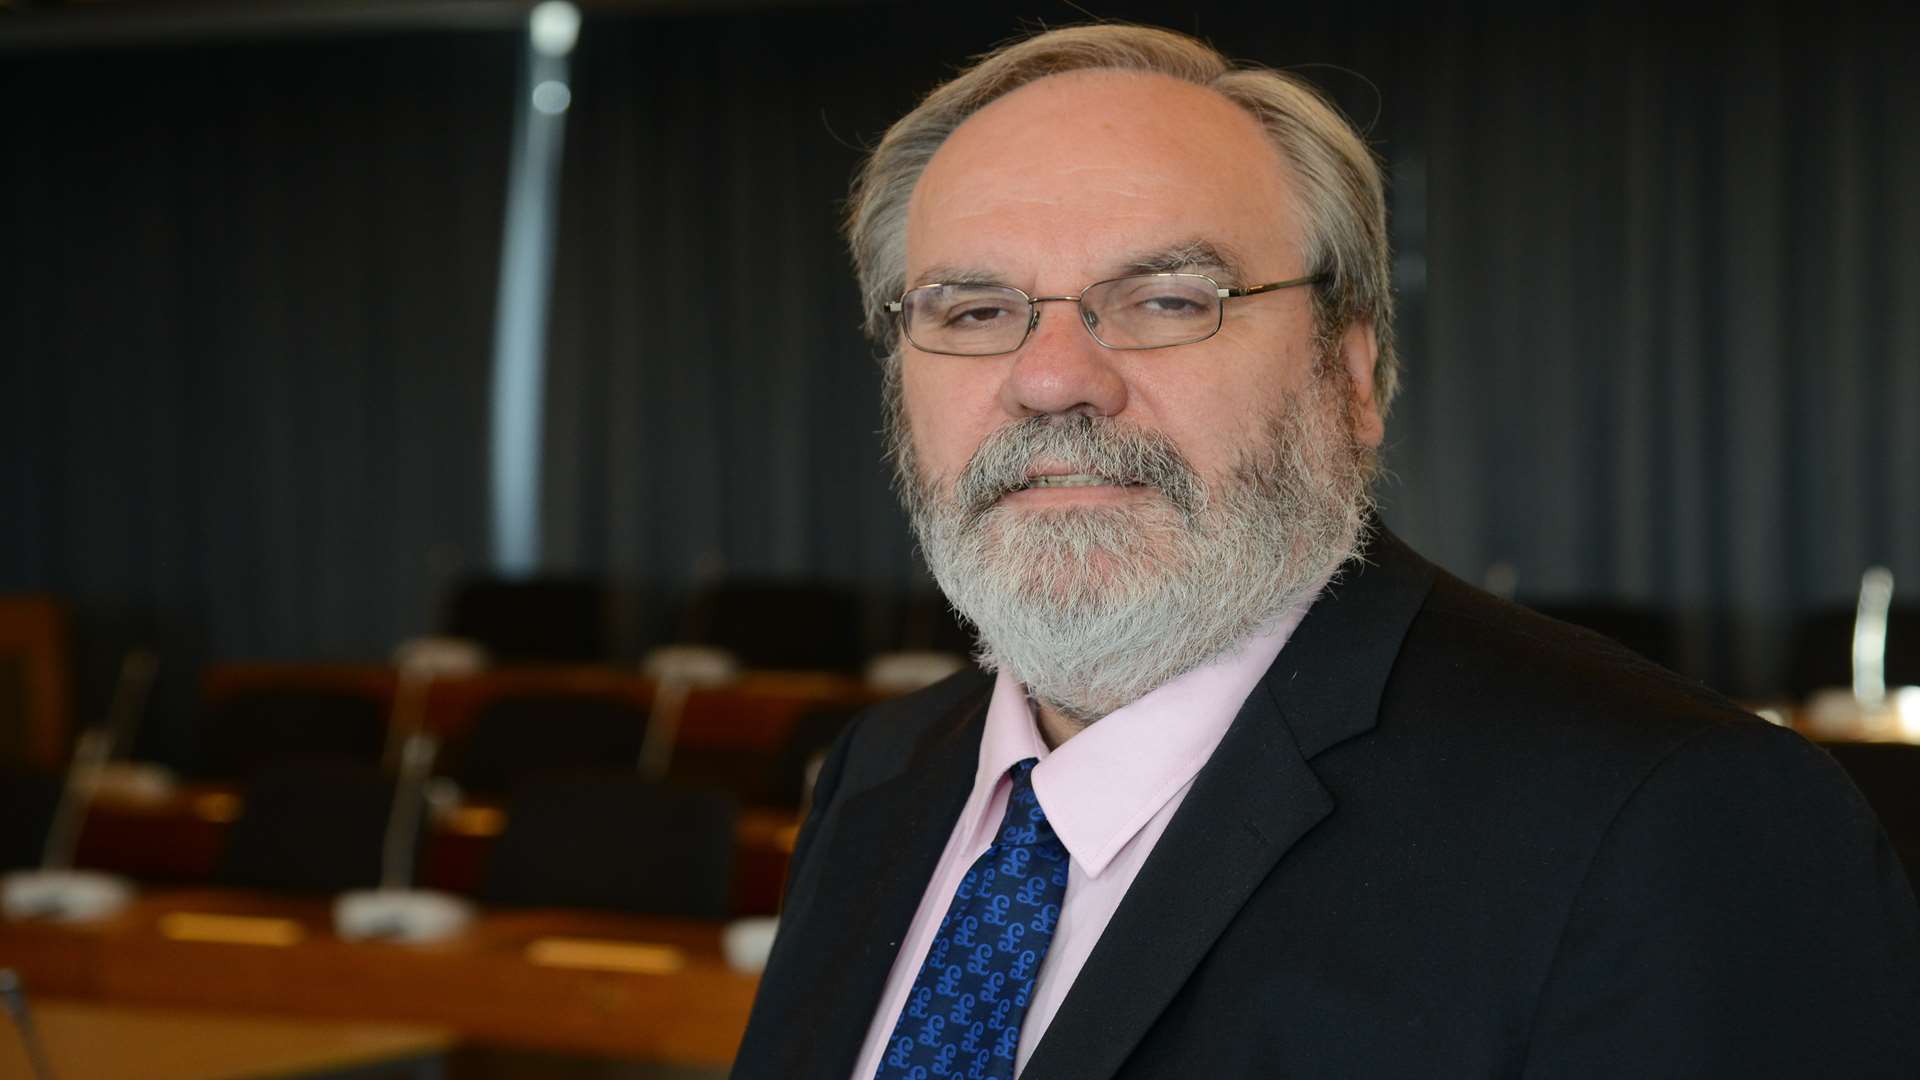 Cllr Chris Wells has quit as TDC leader